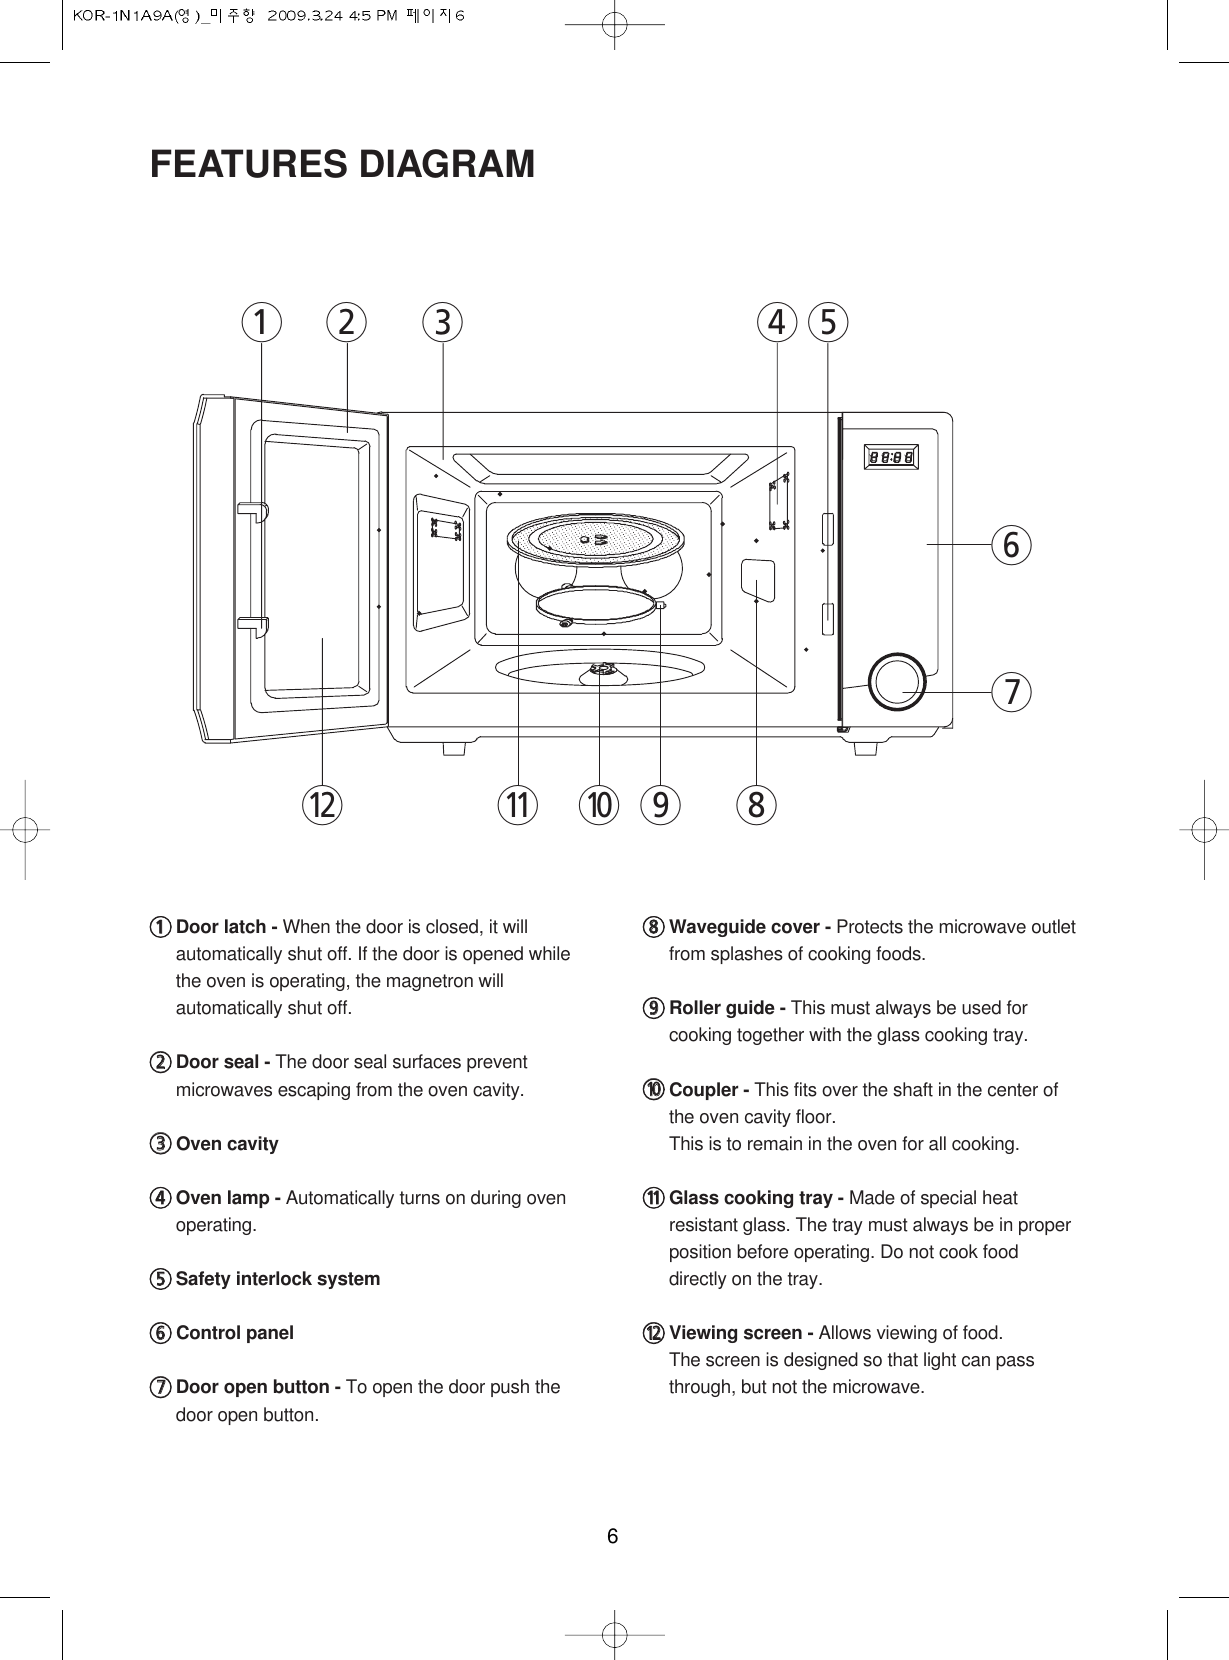 611Door latch - When the door is closed, it willautomatically shut off. If the door is opened whilethe oven is operating, the magnetron willautomatically shut off.22Door seal - The door seal surfaces preventmicrowaves escaping from the oven cavity.33Oven cavity44Oven lamp - Automatically turns on during ovenoperating.55Safety interlock system 66Control panel77Door open button - To open the door push thedoor open button.88Waveguide cover - Protects the microwave outletfrom splashes of cooking foods.99Roller guide - This must always be used forcooking together with the glass cooking tray.00Coupler - This fits over the shaft in the center ofthe oven cavity floor.This is to remain in the oven for all cooking.qqGlass cooking tray - Made of special heatresistant glass. The tray must always be in properposition before operating. Do not cook fooddirectly on the tray.wwViewing screen - Allows viewing of food.The screen is designed so that light can passthrough, but not the microwave.FEATURES DIAGRAM12 3 4567890qw